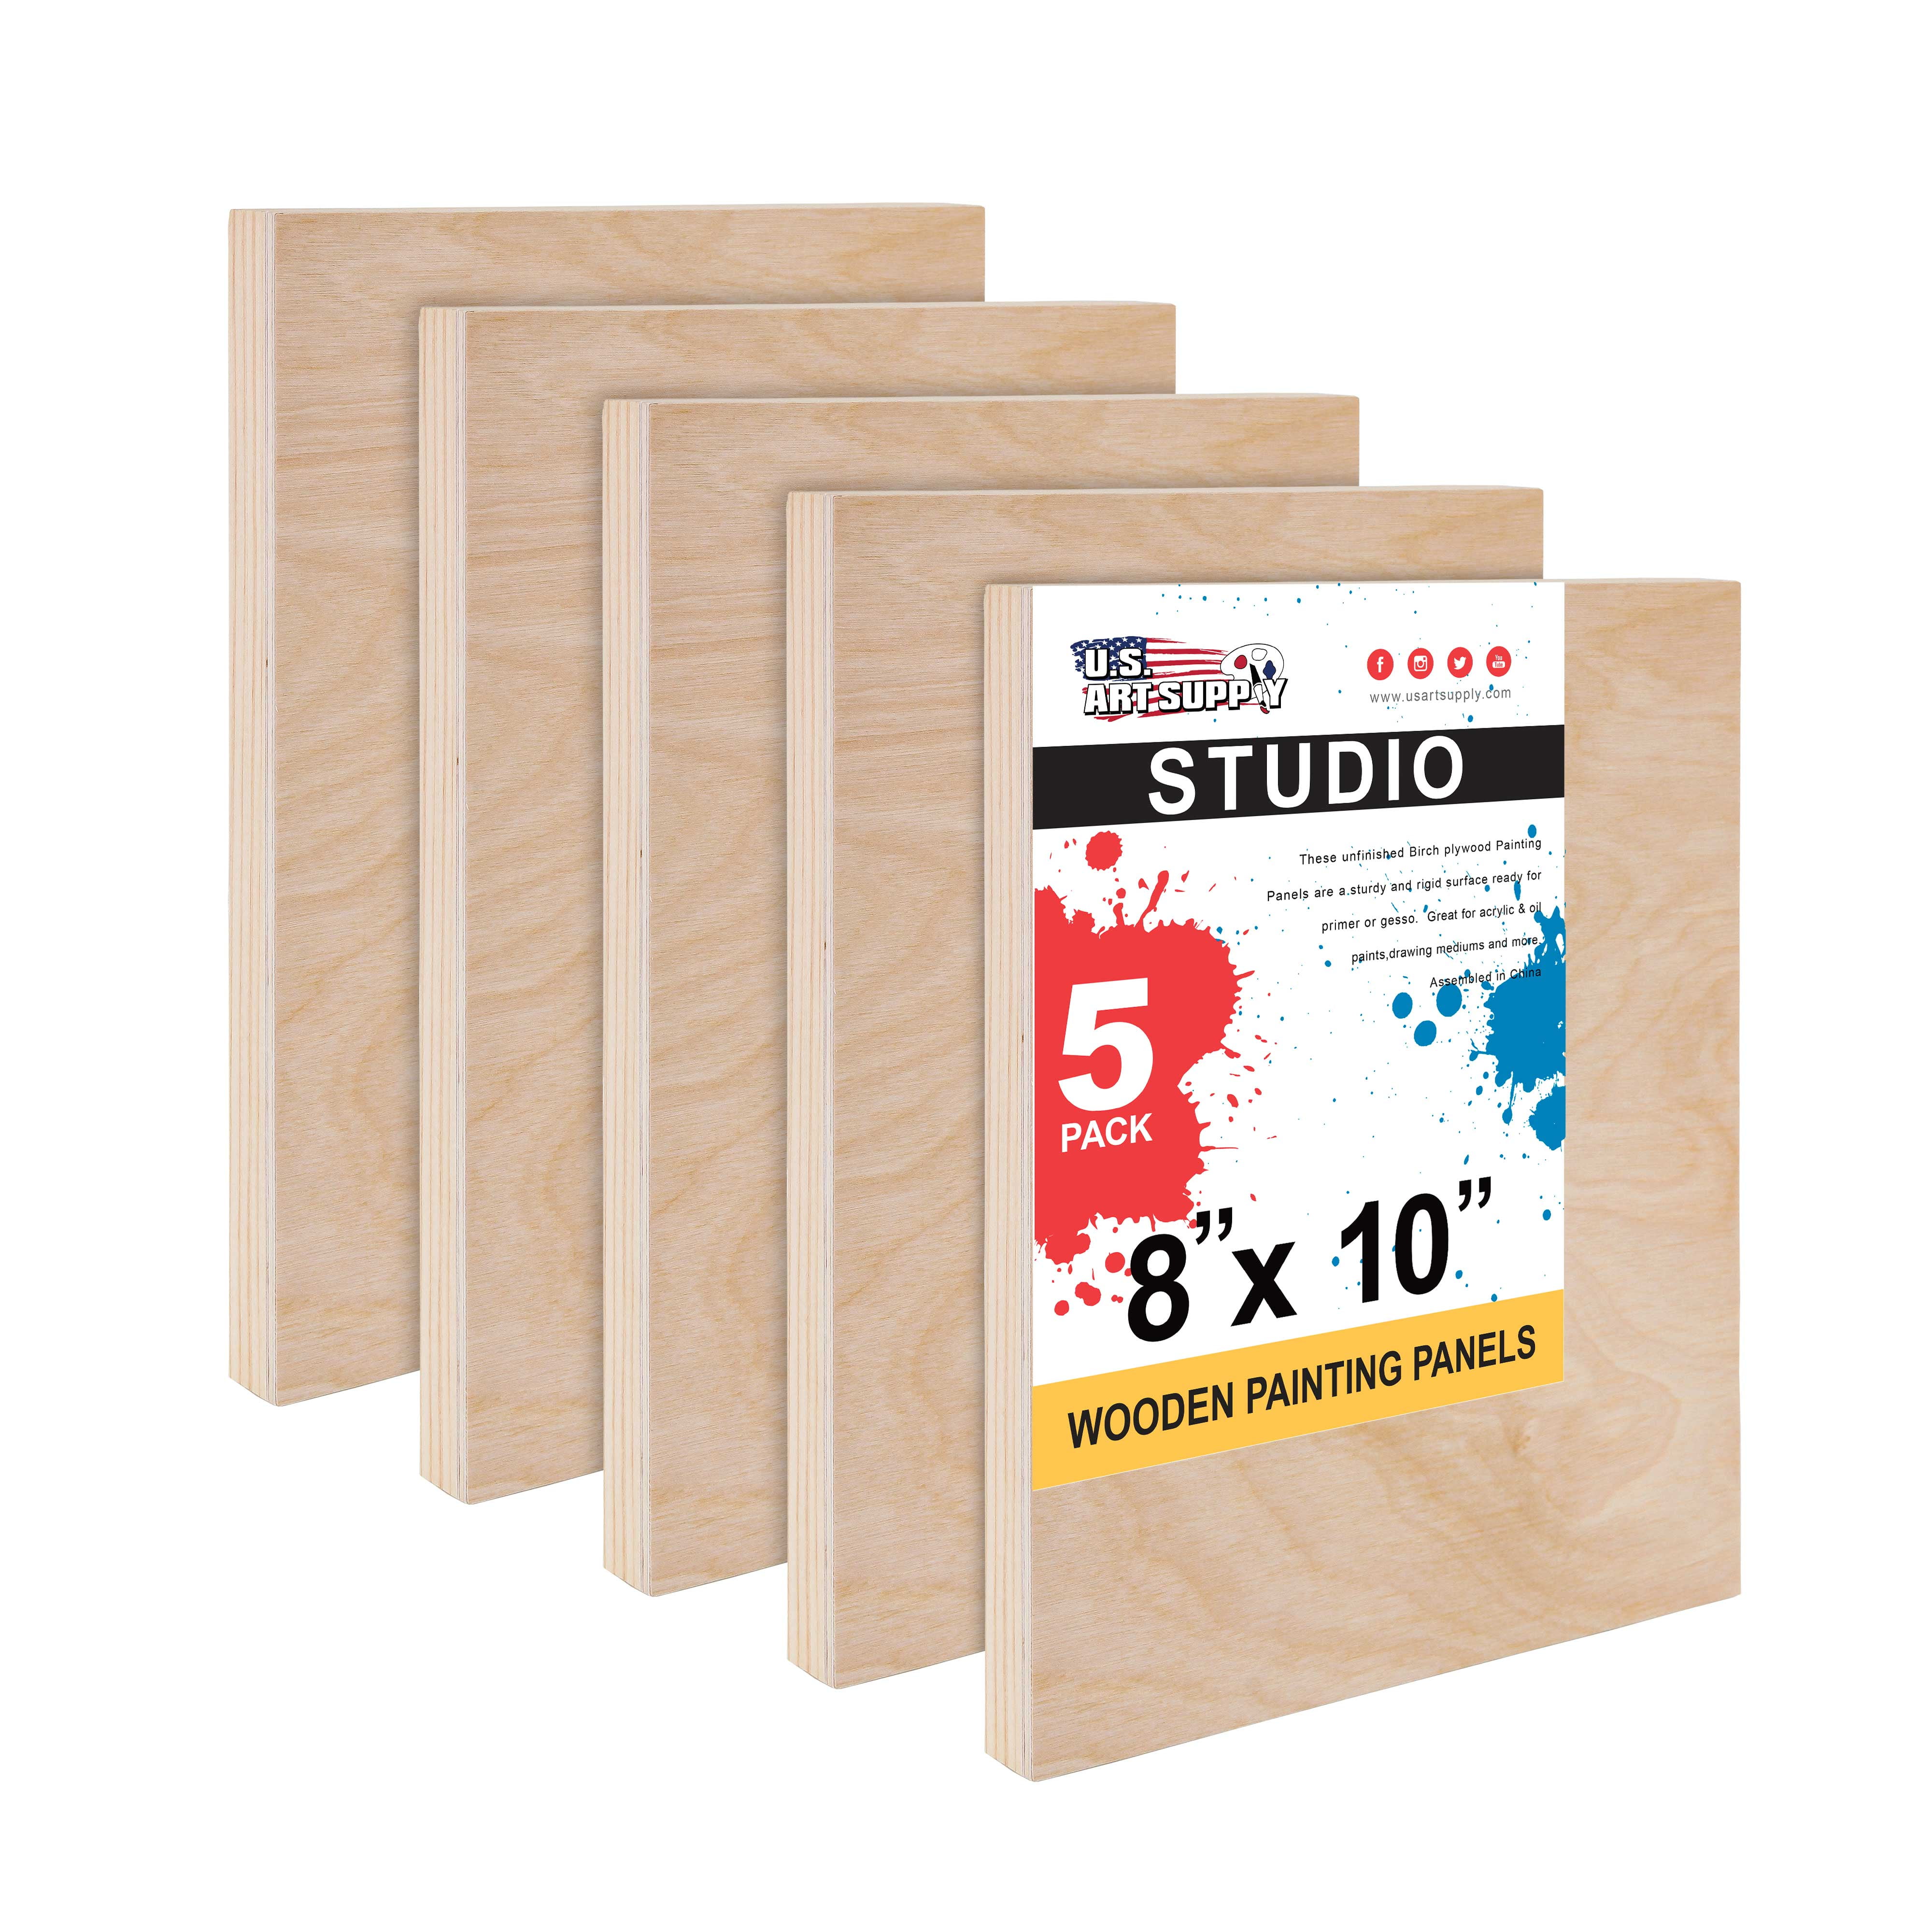 Acrylics 5 Pack of 8x10 Inch Birch Wood Paint Panel Boards MEEDEN Wood Canvas Panels Crafts Paint Mixed-Media Oils Studio 3/4'' Deep Encaustic Cradled Wooden Painting Panels for Pouring Art 